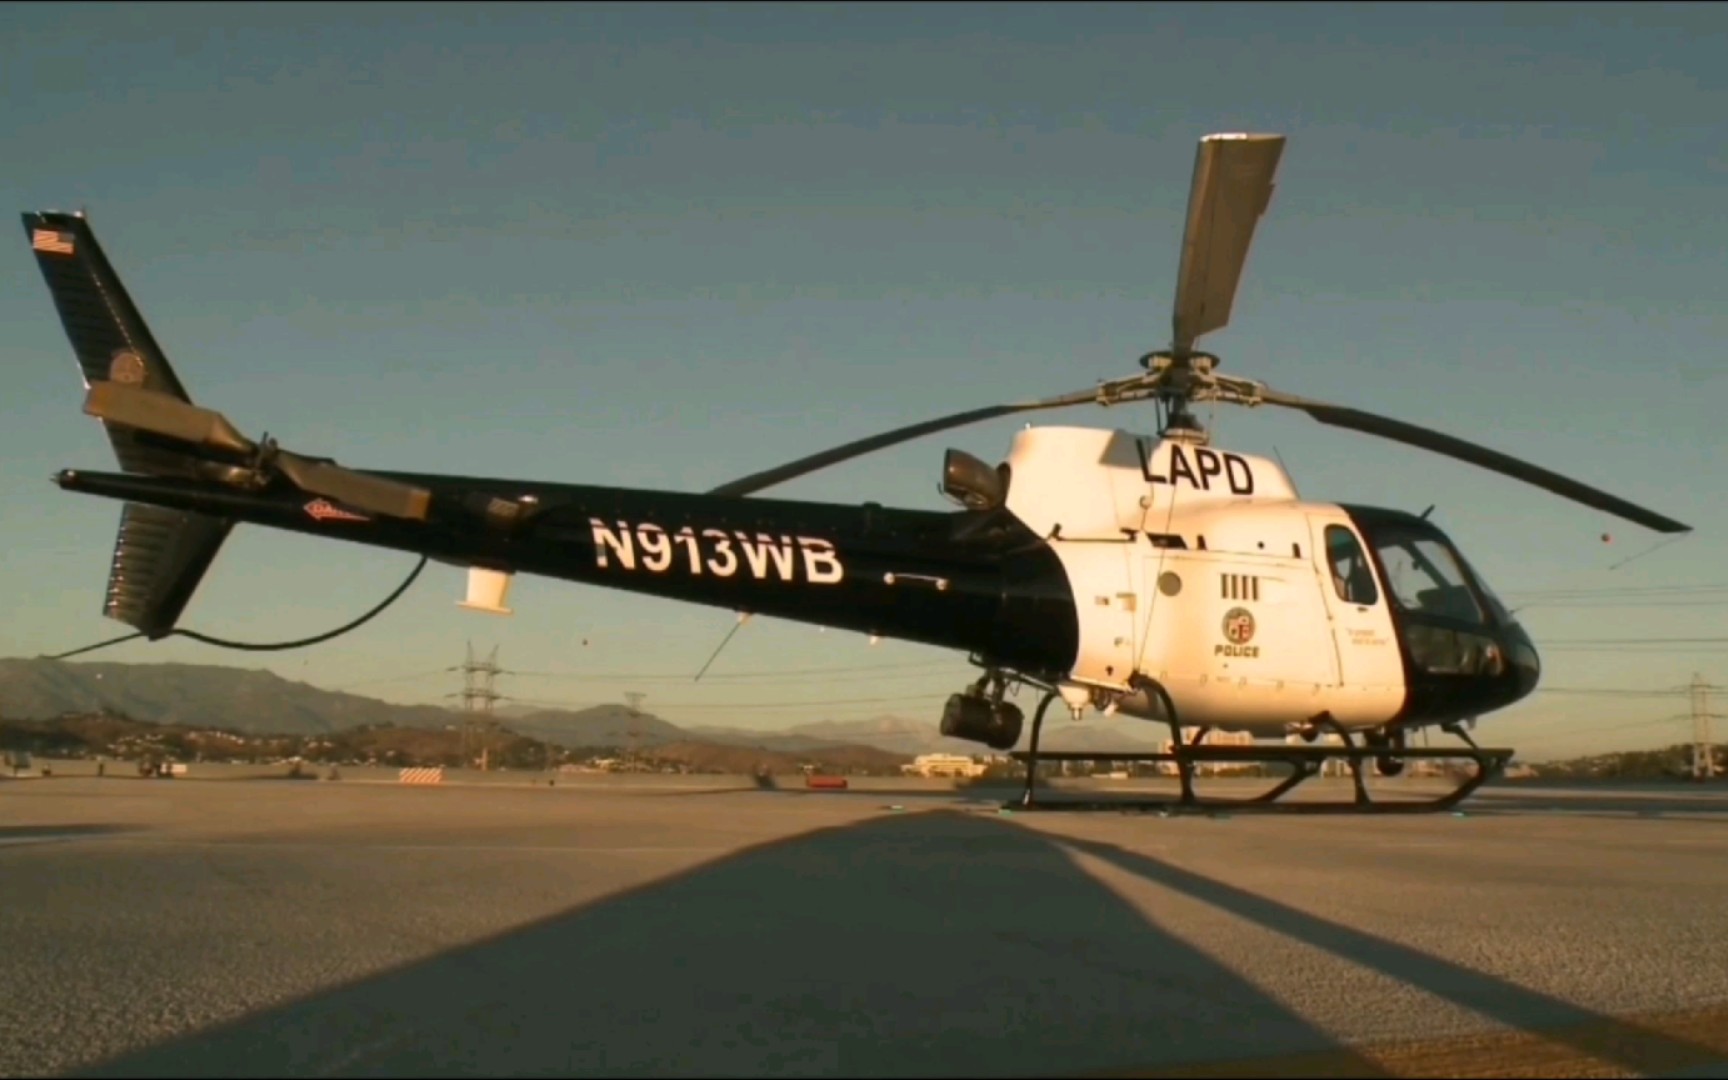 【lapd】a quick look into the lapd aerial unit